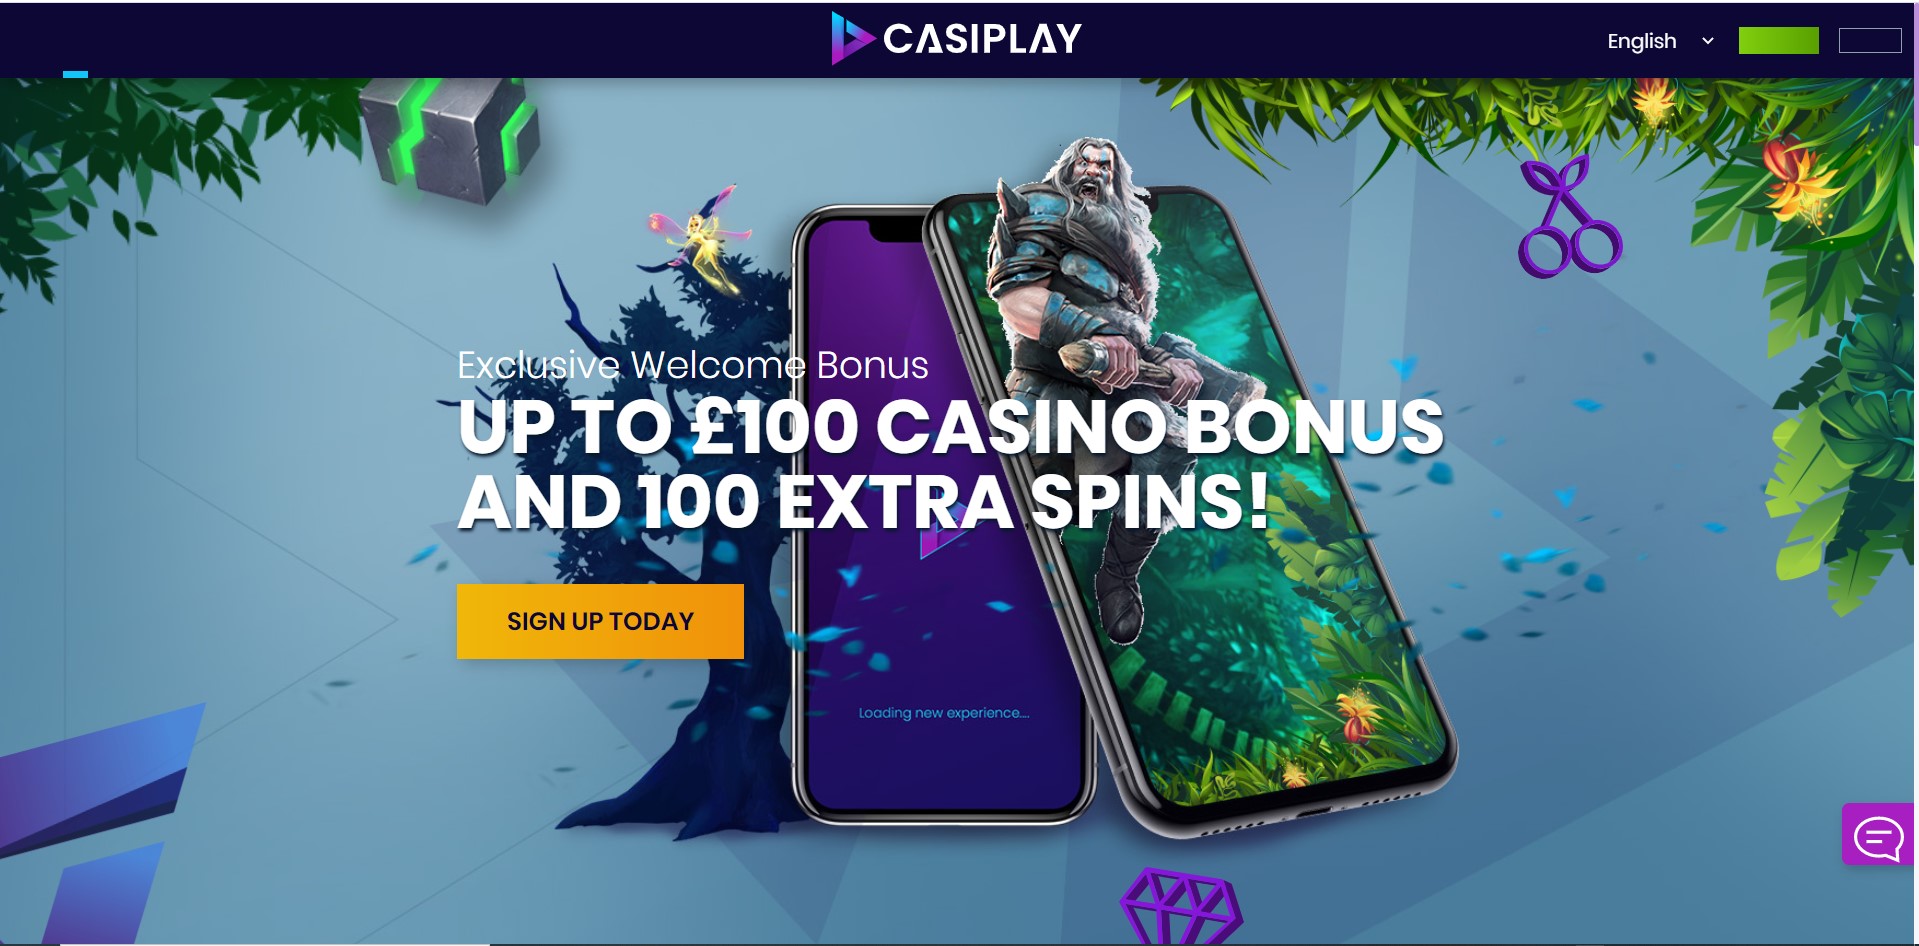 Casiplay casino promotions